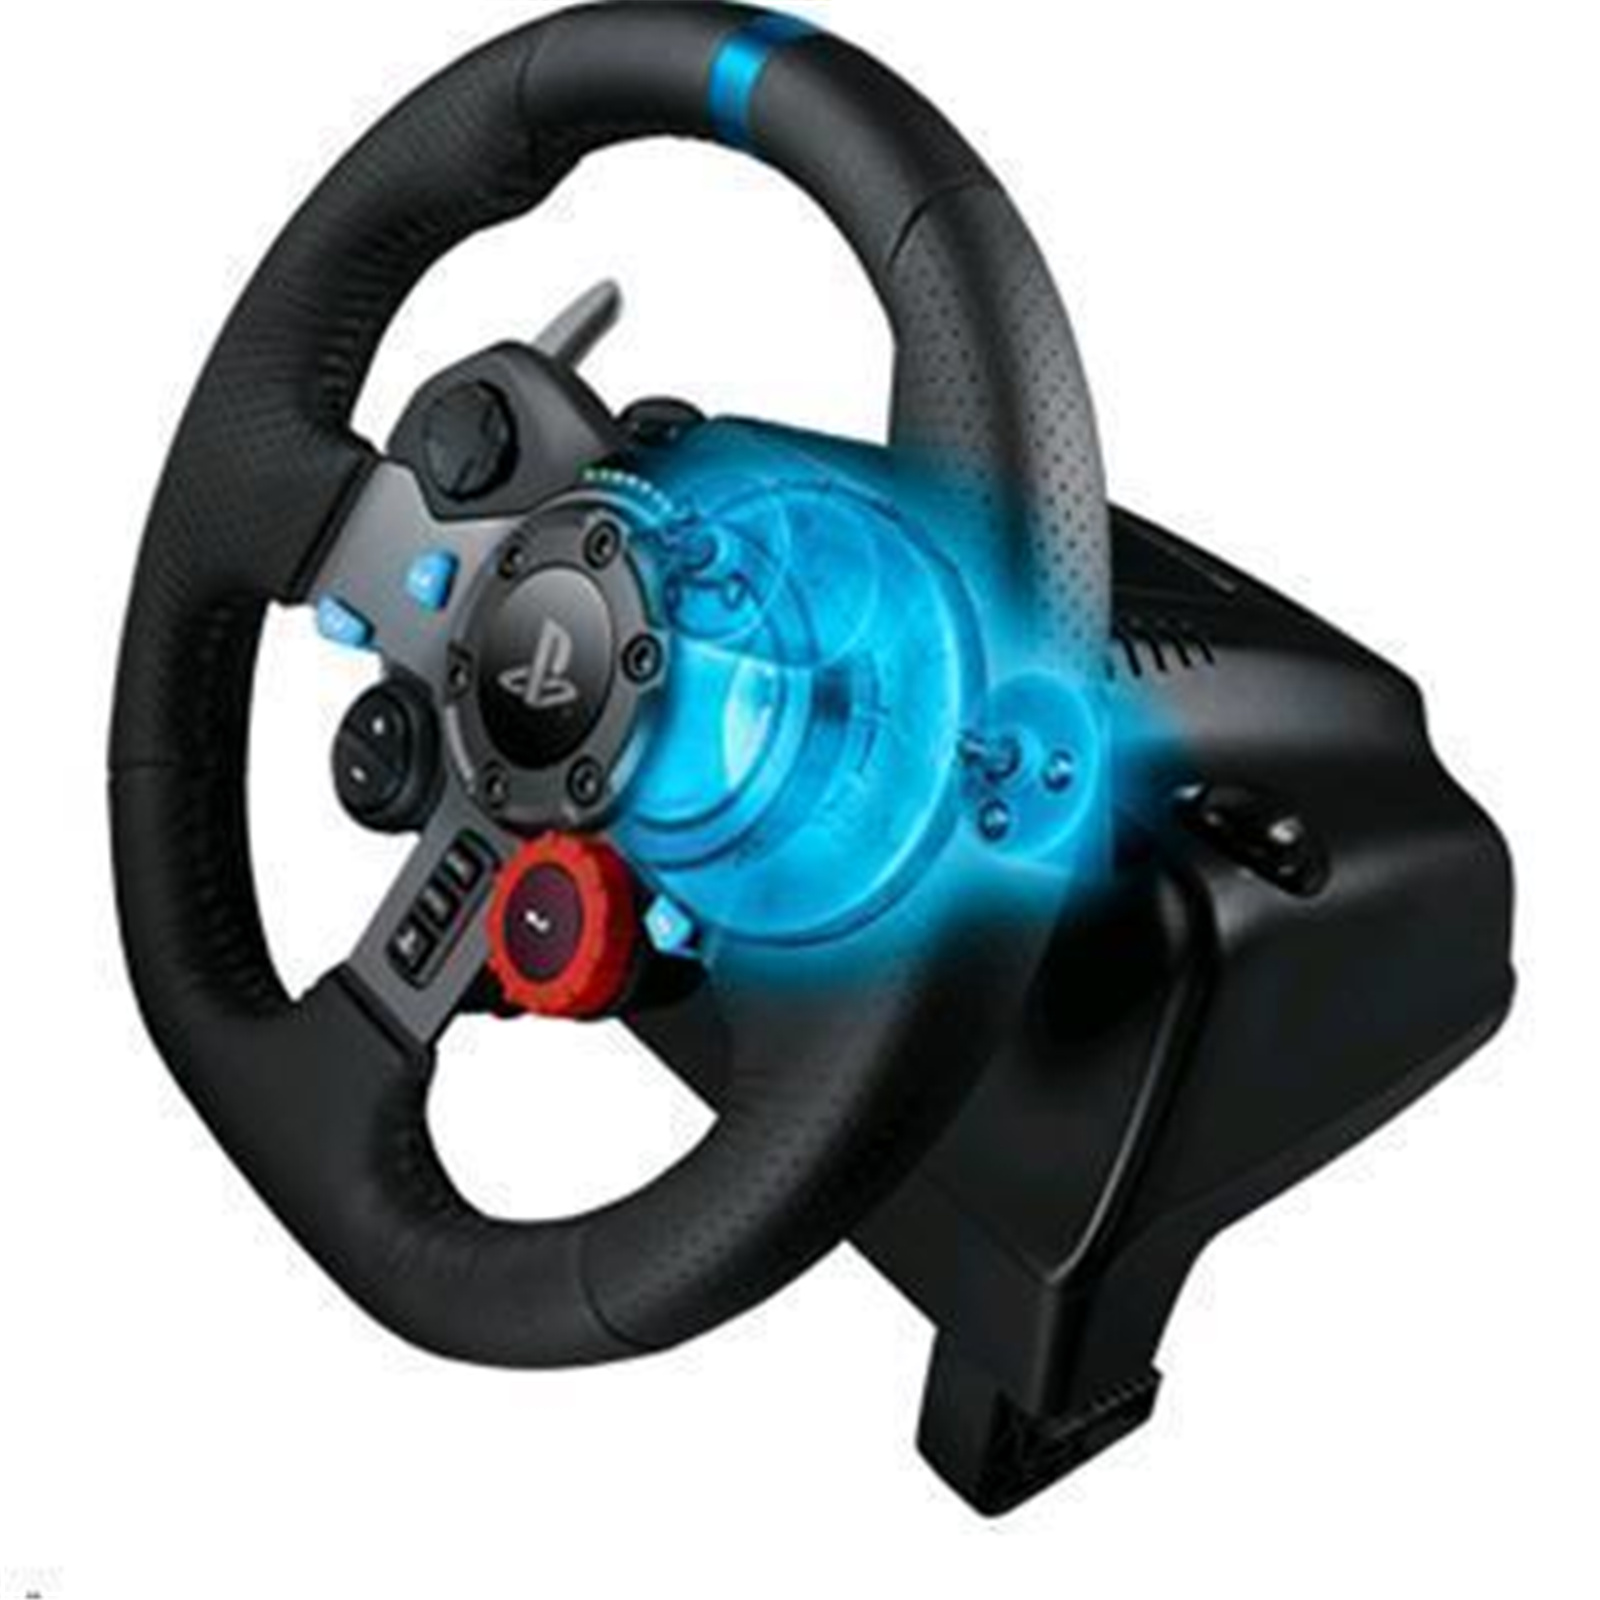  Logitech G29 Driving Force Racing Wheel and Pedals, Force  Feedback, Real Leather + Logitech G Driving Force Shifter - For PS5, PS4  and PC, Mac - Black : Everything Else